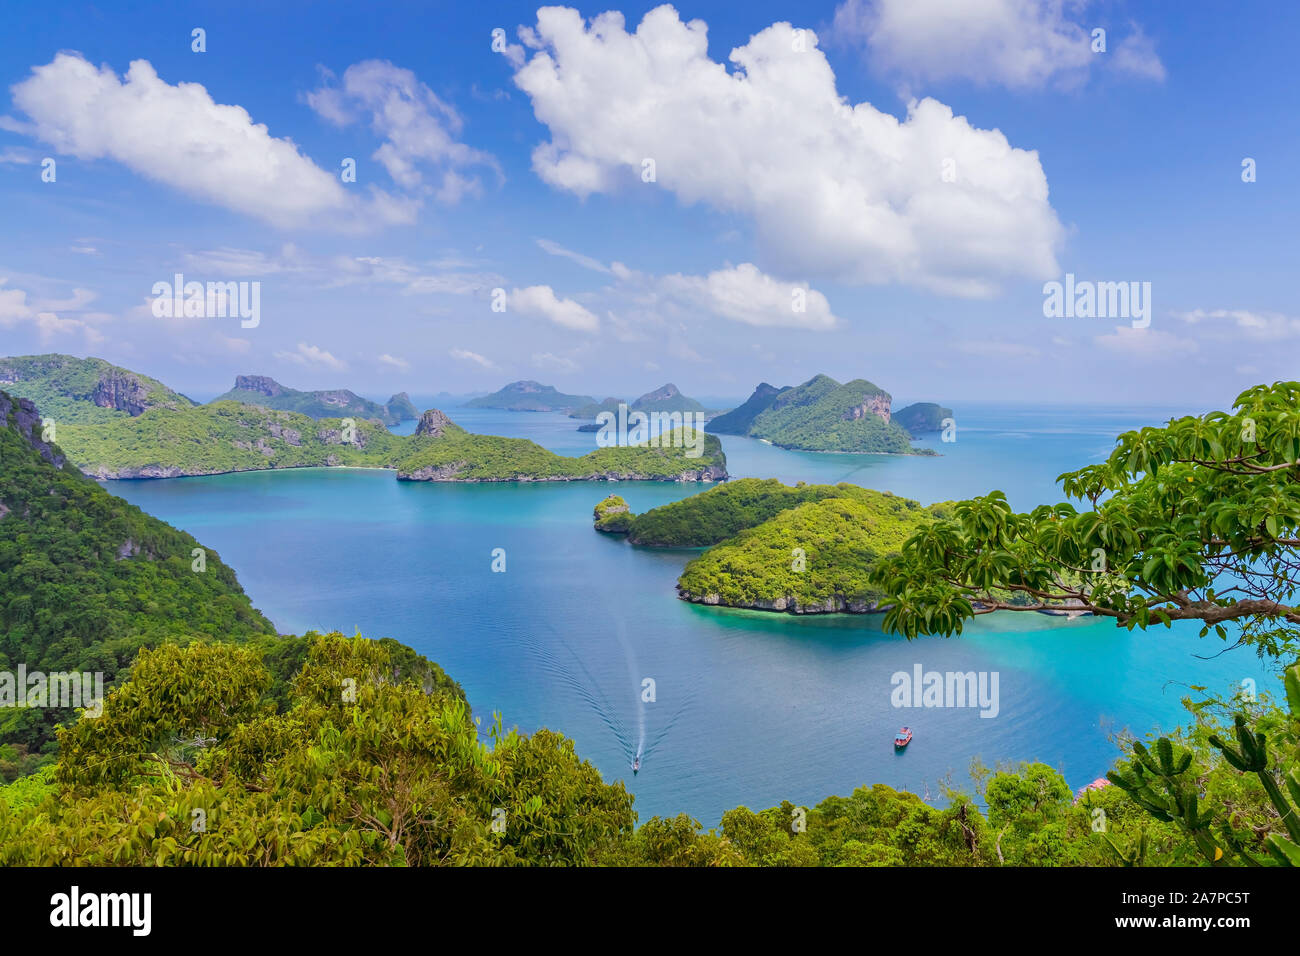 Beautiful scenery at view point of Ang Thong National Marine Park near Koh Samui in Gulf of Thailand, Surat Thani Province, Thailand. Stock Photo